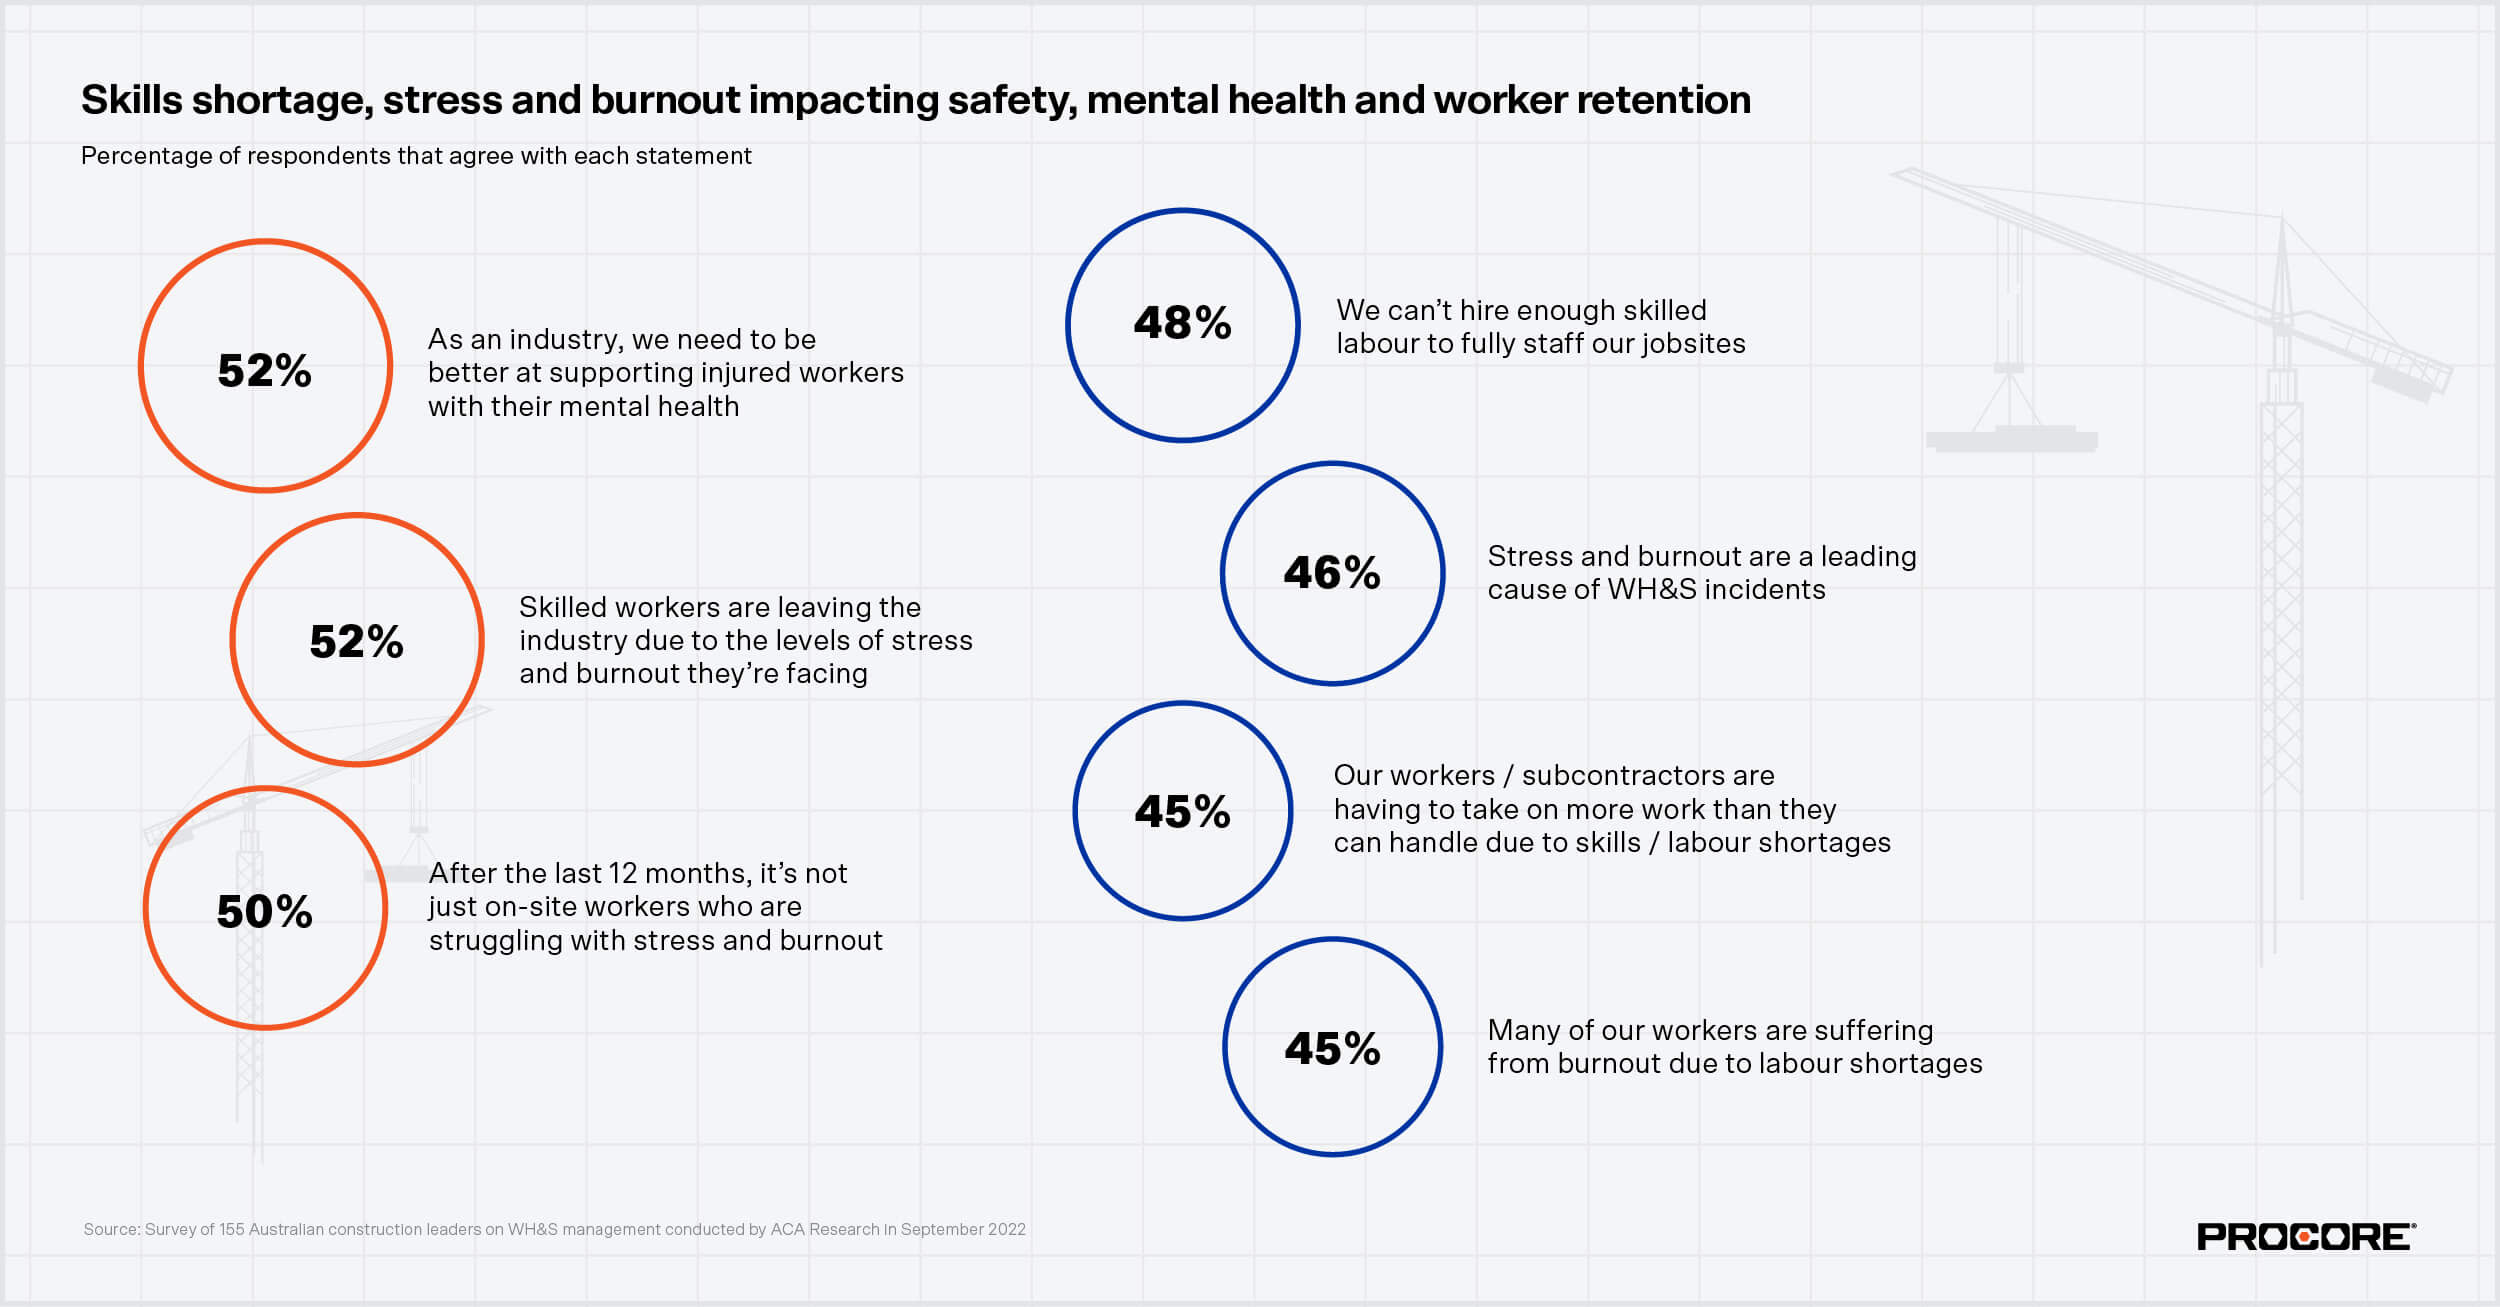 Stats about skills shortage, stress and burnout impacting workers